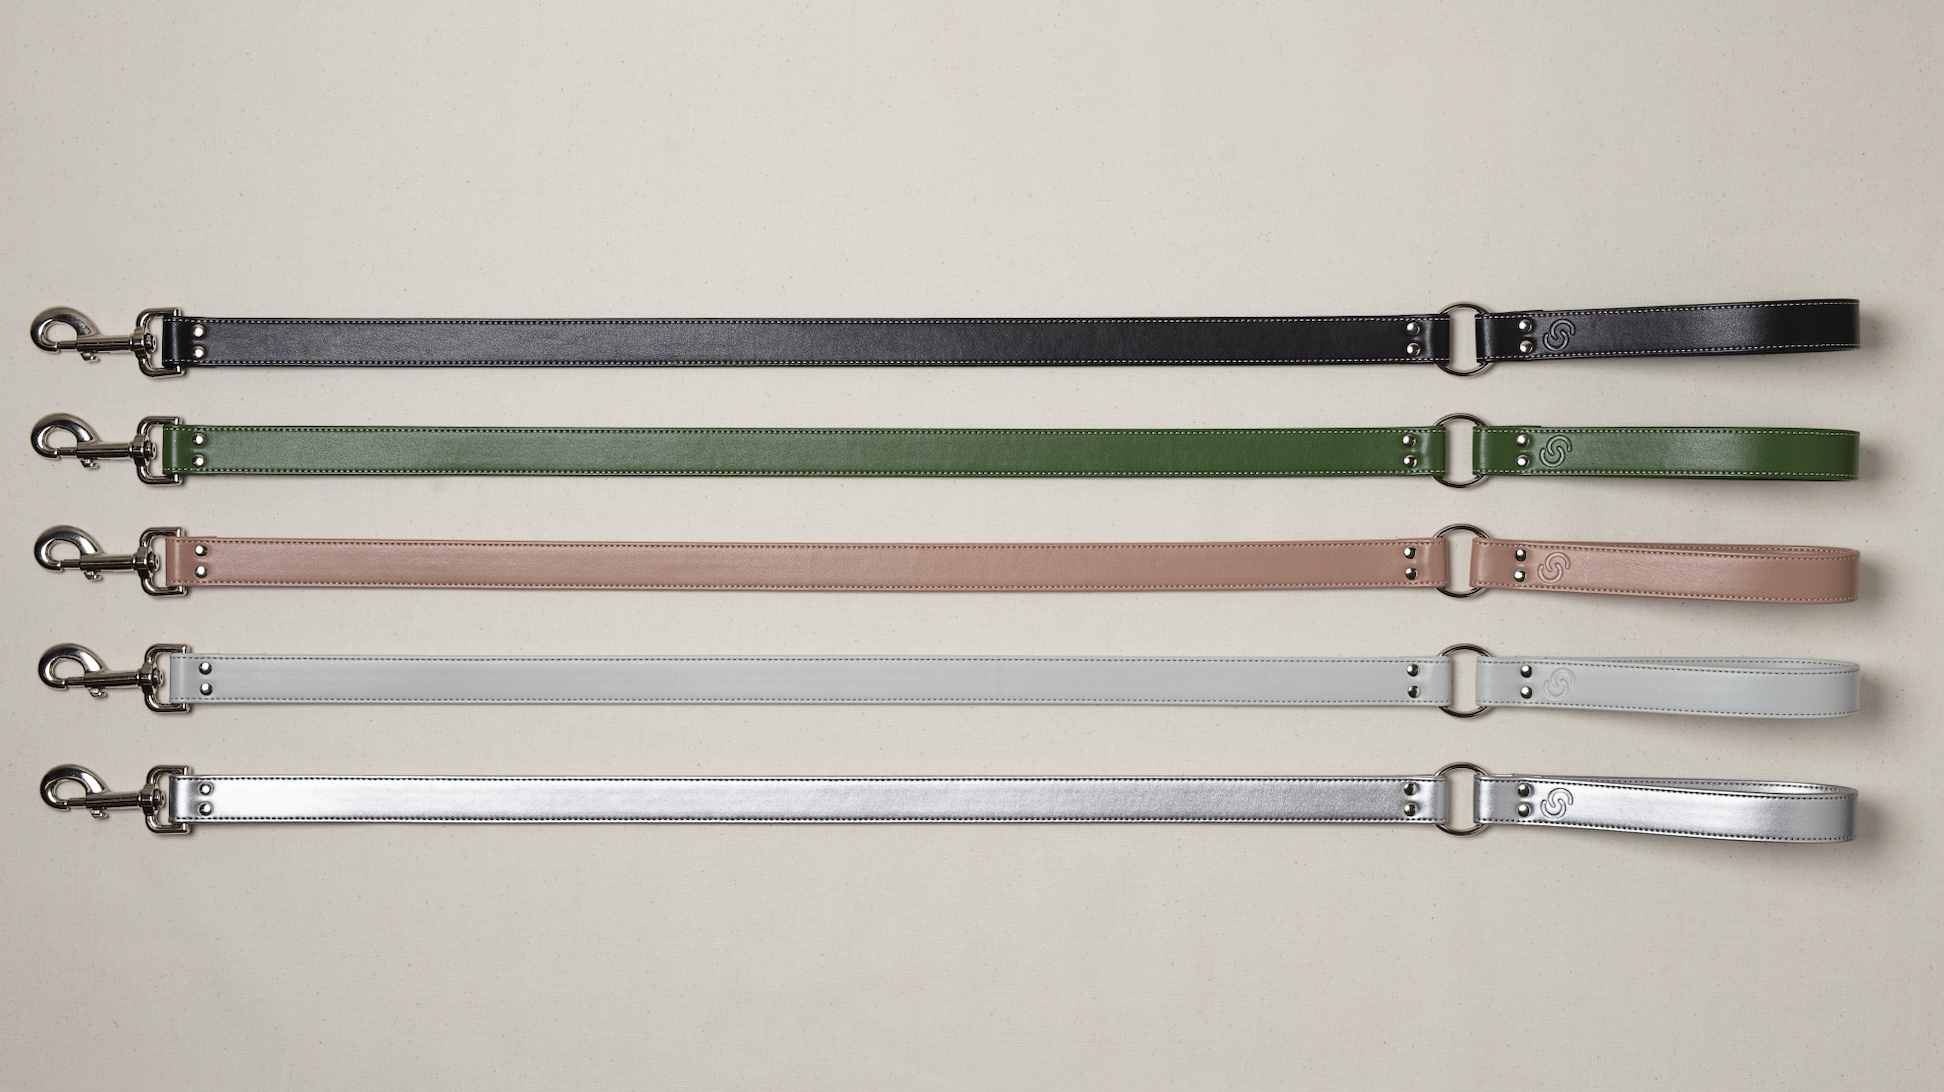 Skylos Collective ethically made handcrafted apple leather dog leads and leashes. Available in blush pink, forest green, ice blue, balck and silver. Classical design